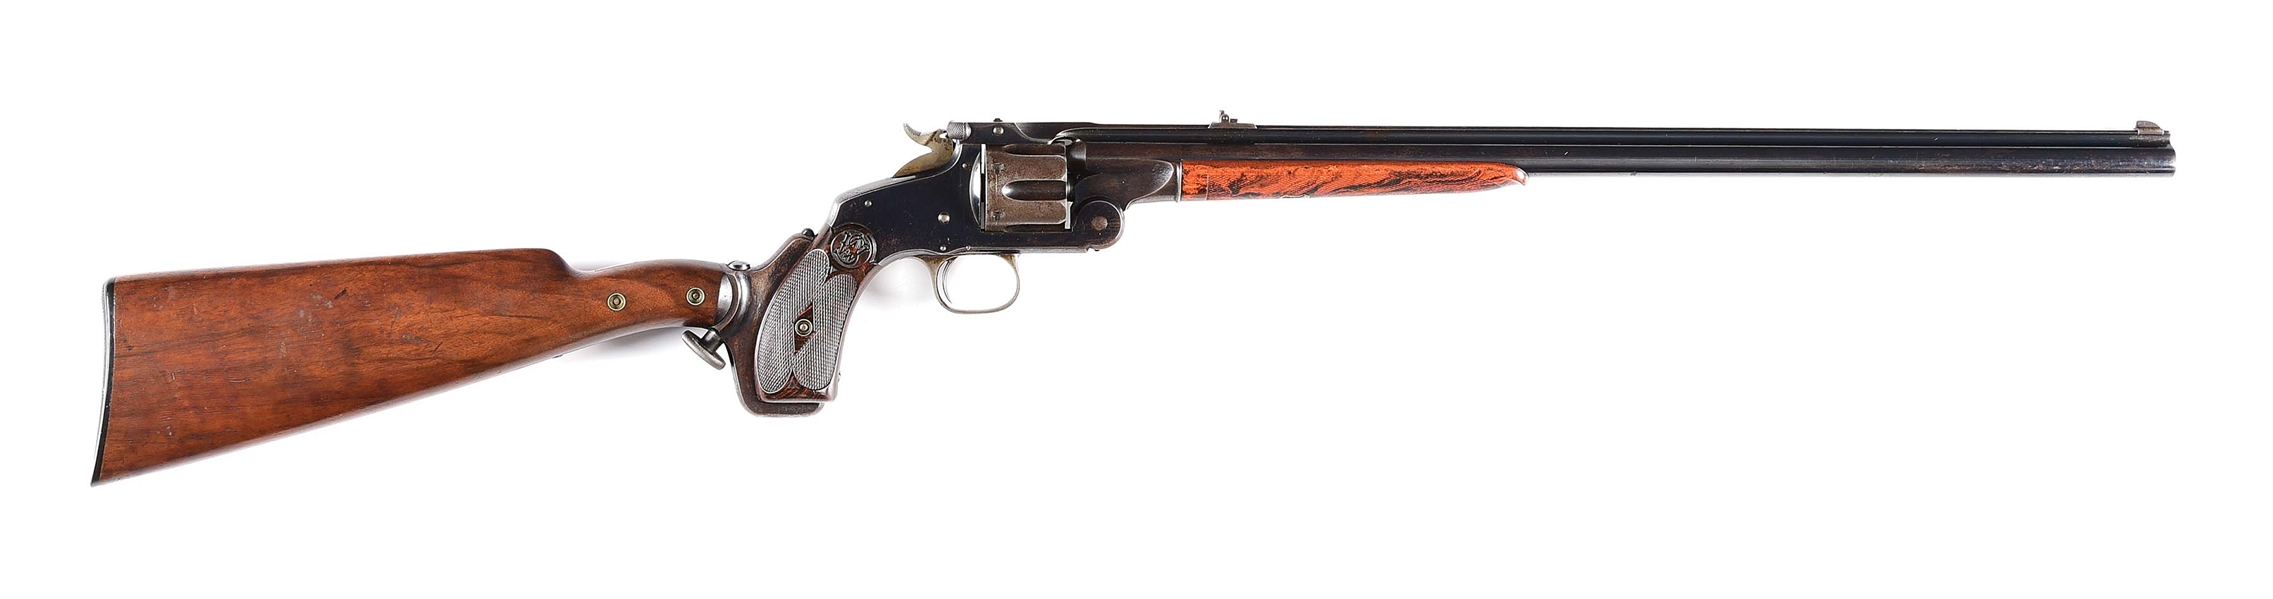 (A) SMITH & WESSON MODEL 320 REVOLVING RIFLE